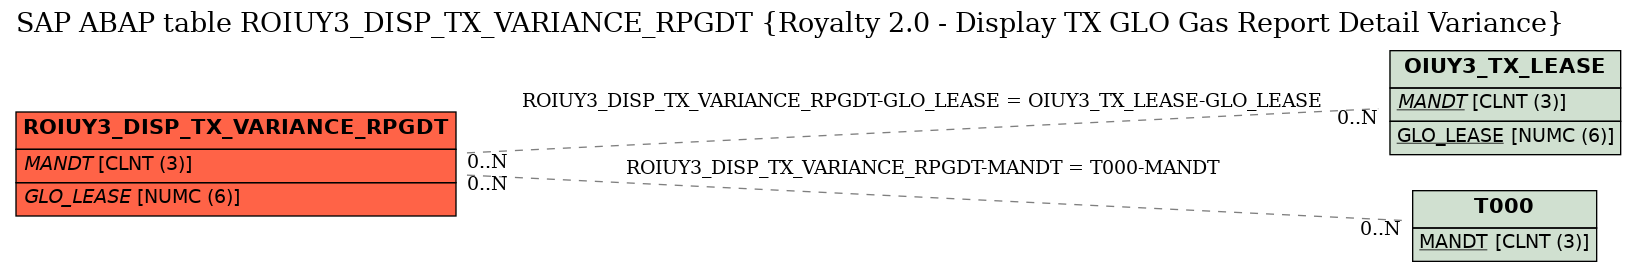 E-R Diagram for table ROIUY3_DISP_TX_VARIANCE_RPGDT (Royalty 2.0 - Display TX GLO Gas Report Detail Variance)